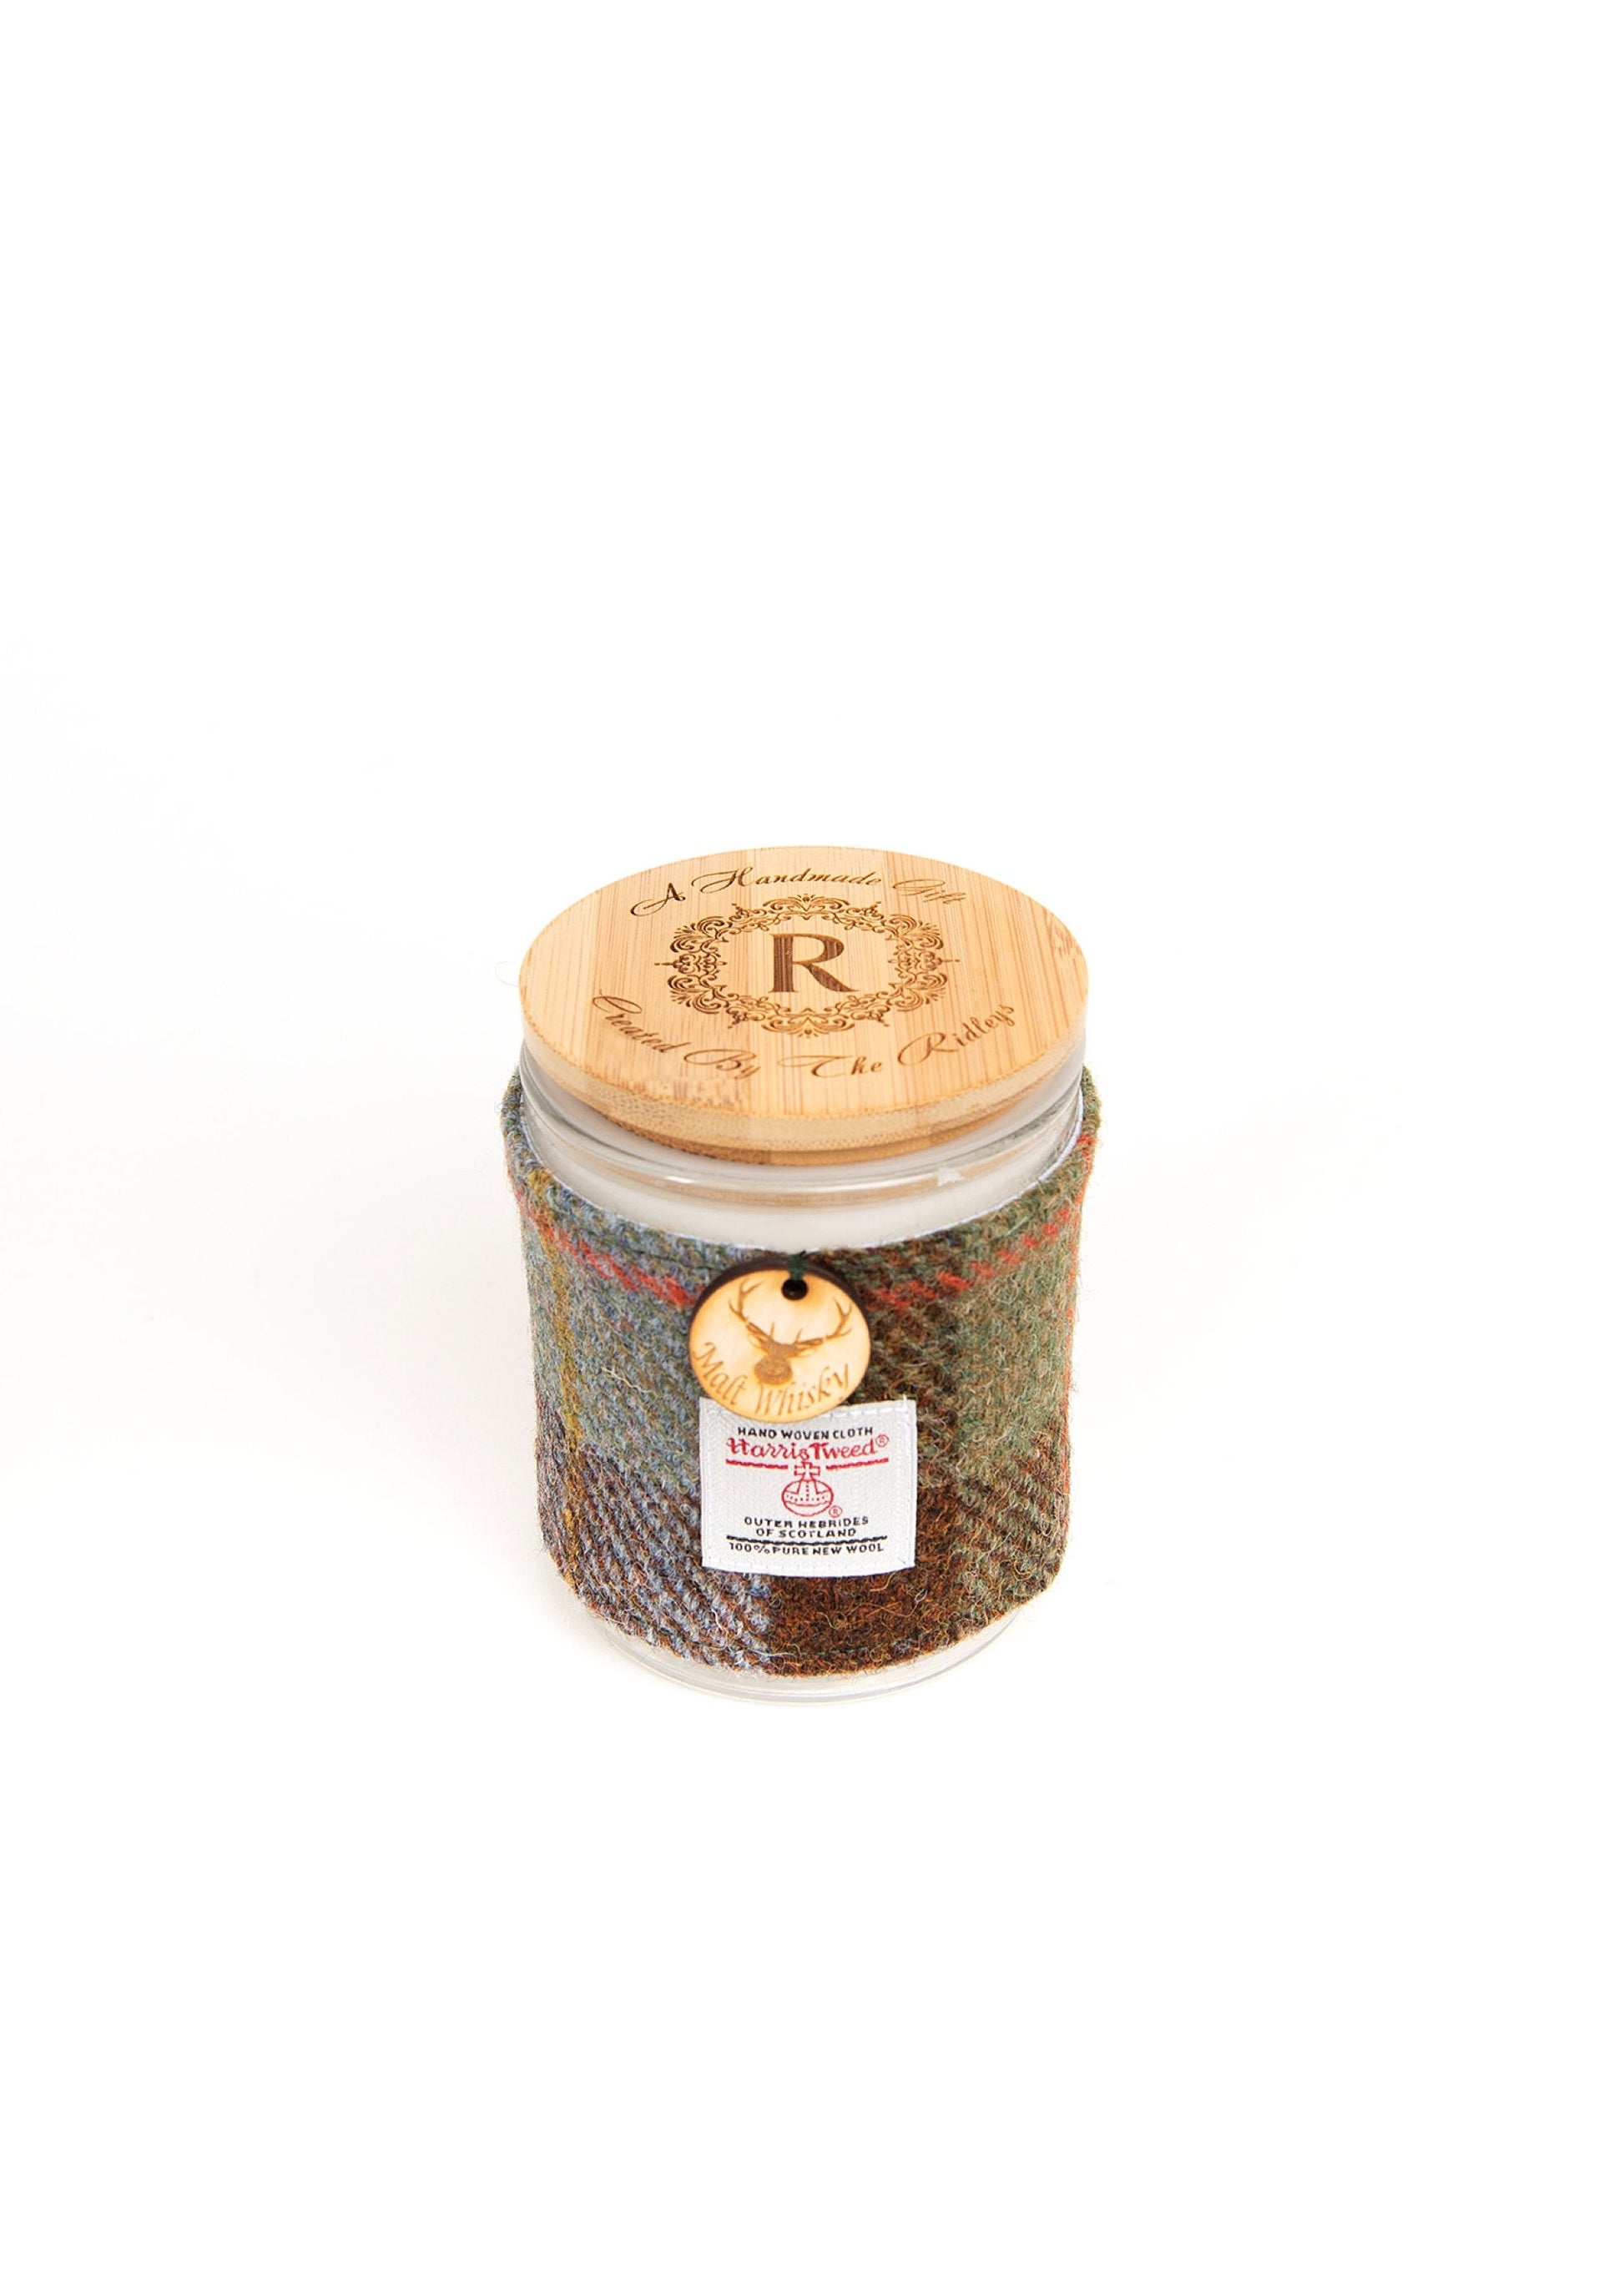 Malt Whisky Scented Soy Candle with Harris Tweed Sleeve